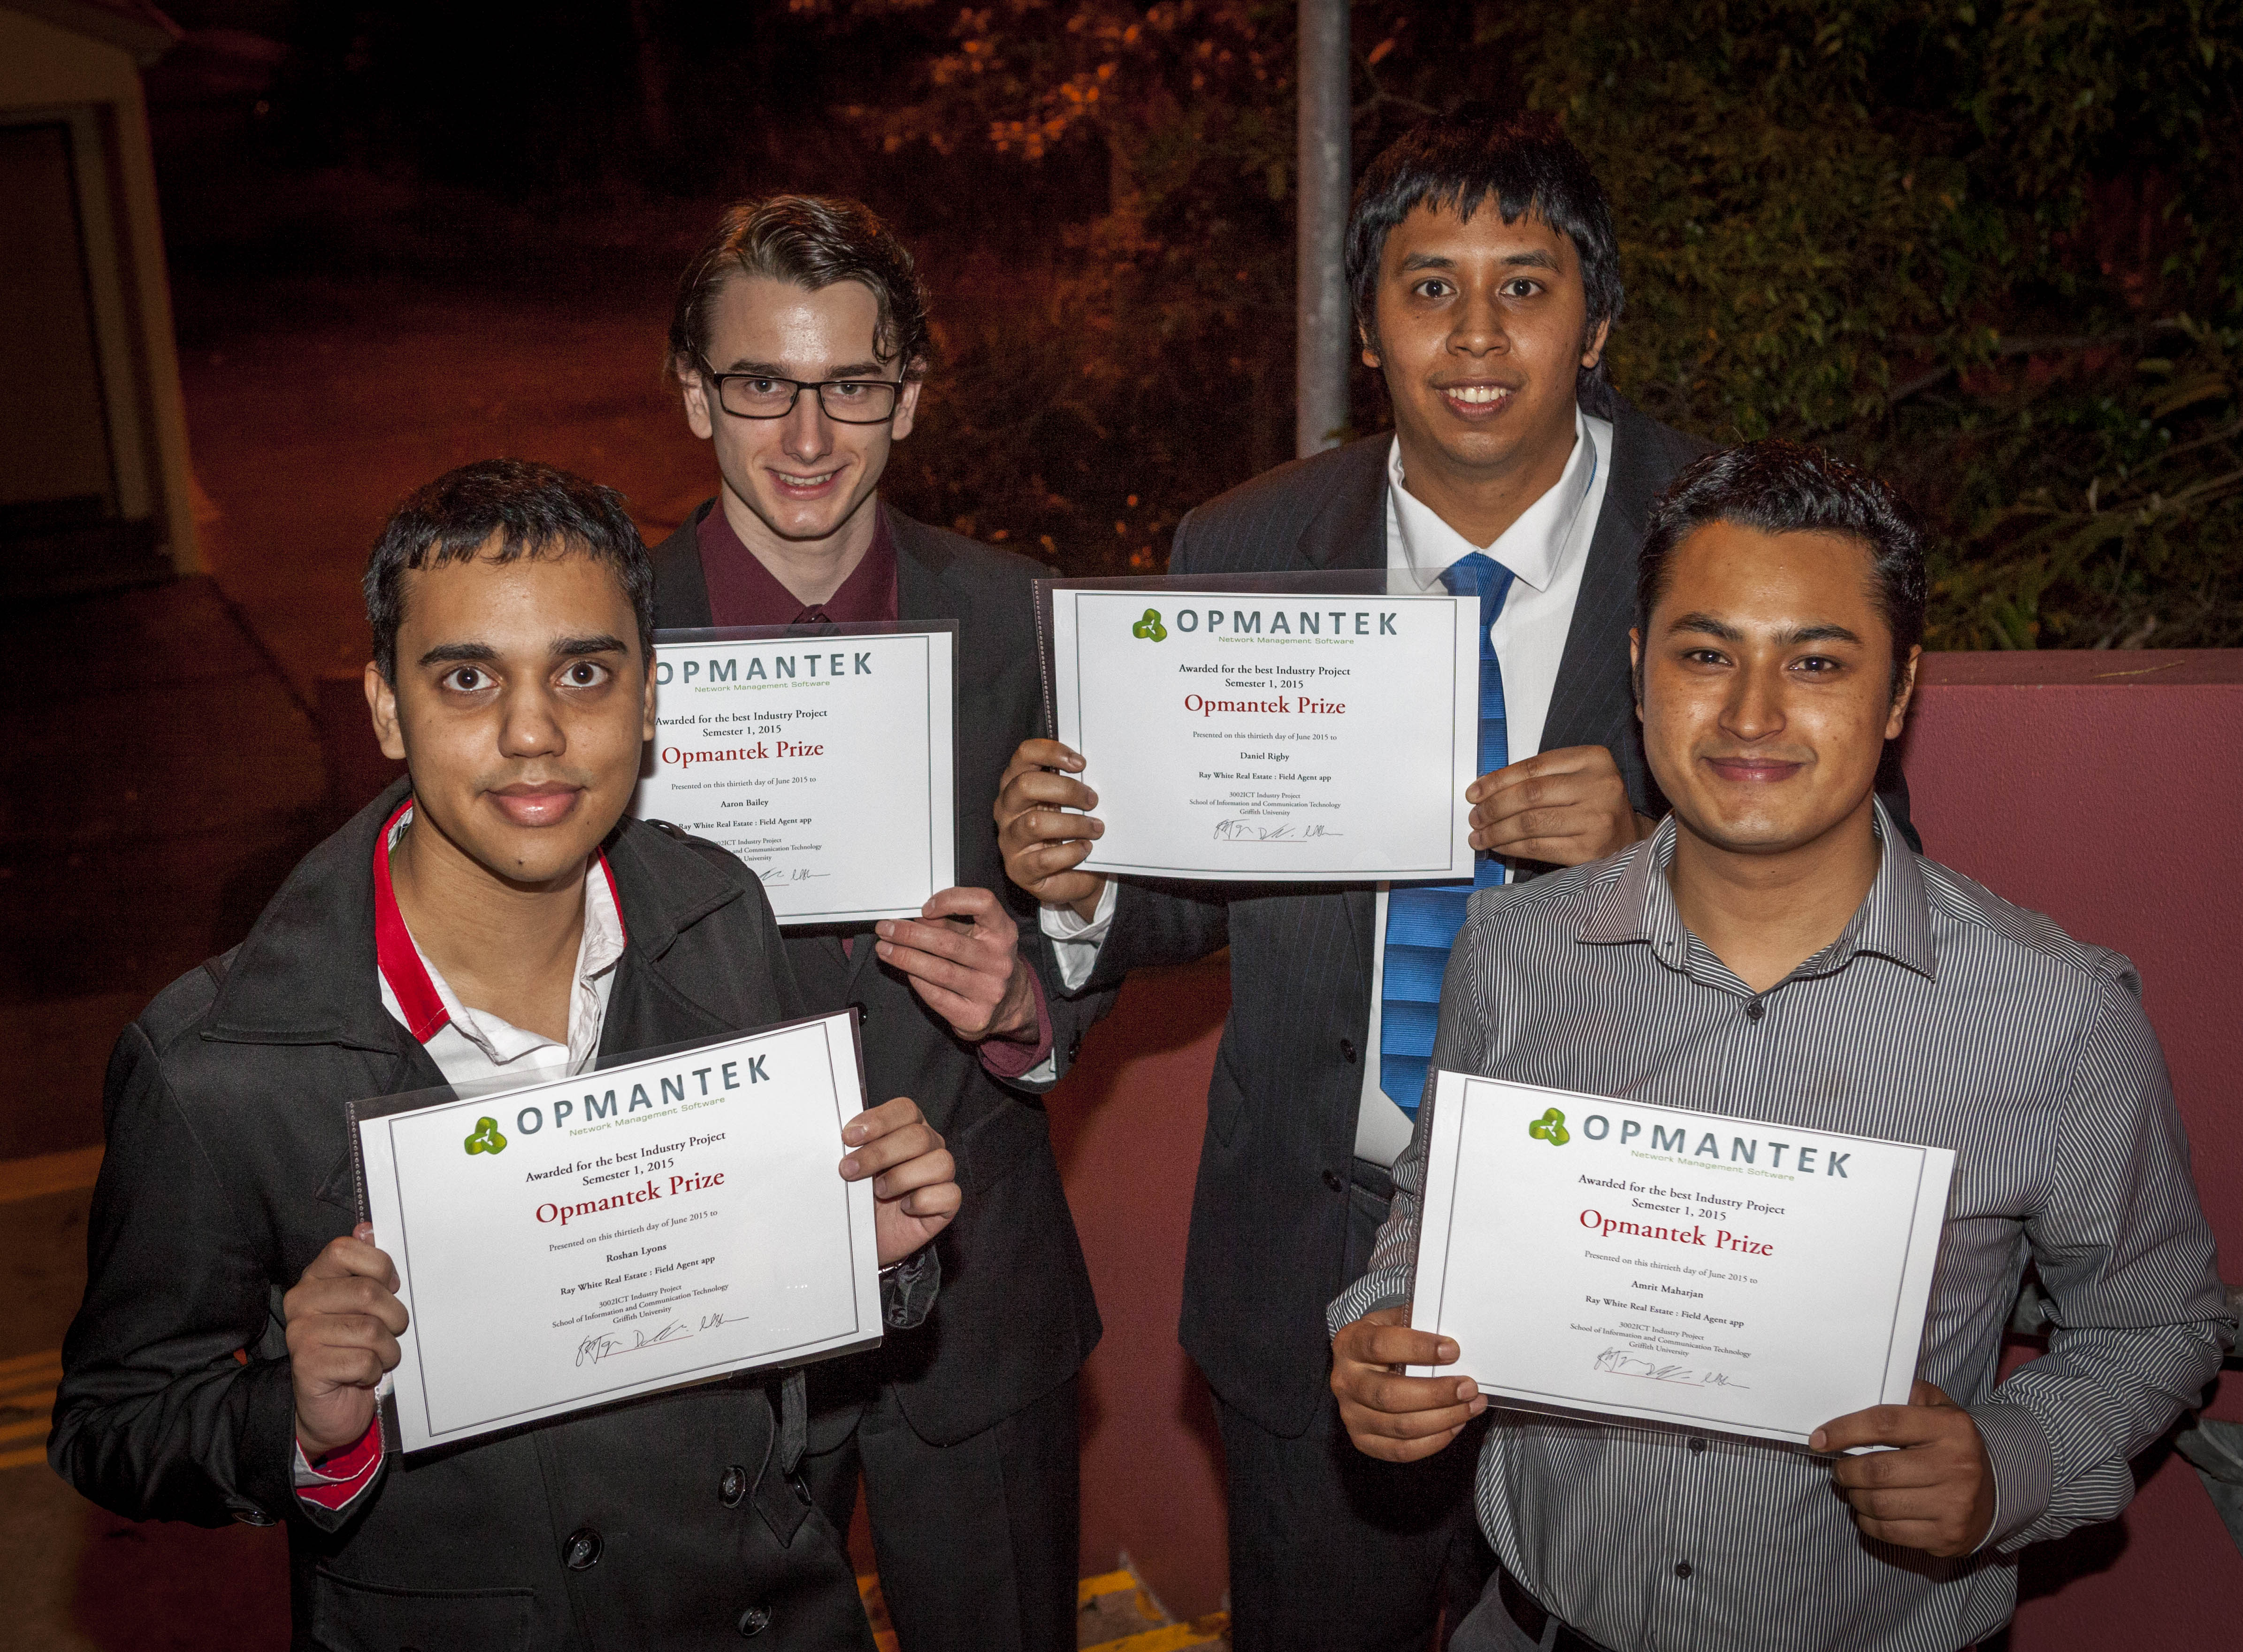 Winners of the 2015 Opmantek Prize, from left, ICT students Roshan Lyons, Aaron Bailey, Daniel Rigby and Amrit Maharjan, holding their certificates